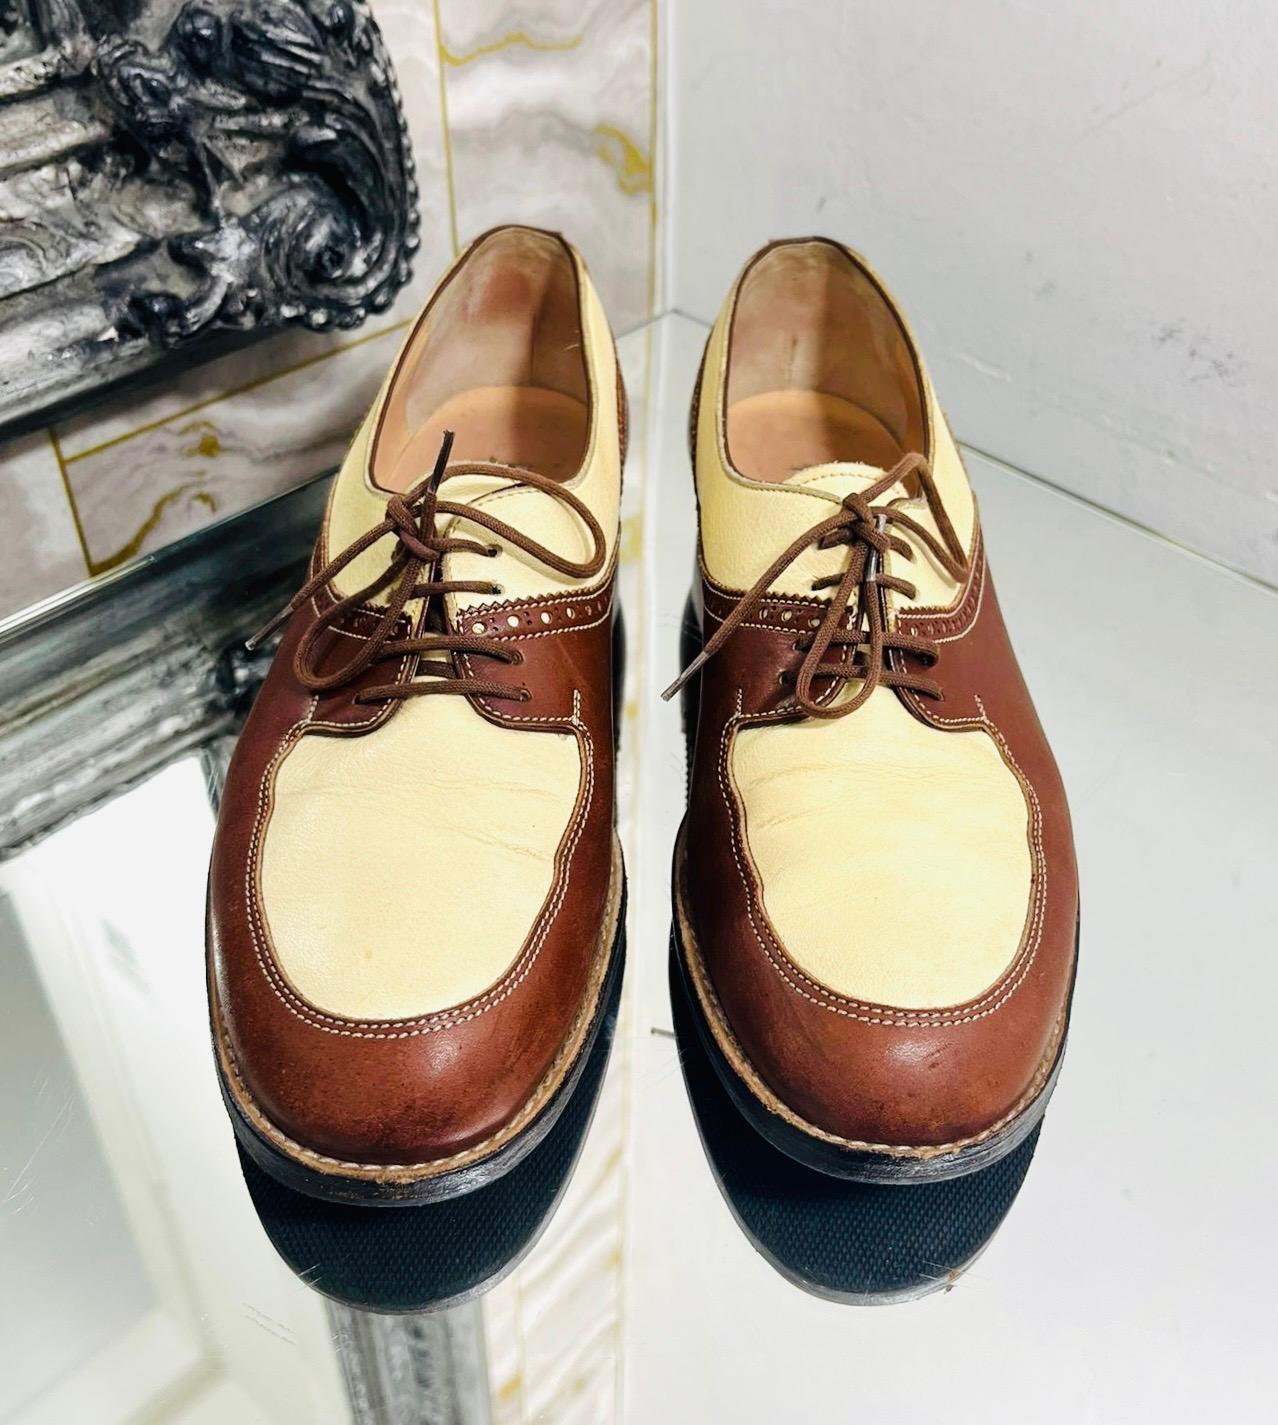 Manolo Blahnik Leather Brogues

Brown lace-up shoes designed with ivory inserts and decorative perforation details.

Featuring round toes and leather lining and insoles.

Size – 40

Condition – Fair (Some scratches and discolorations, general signs